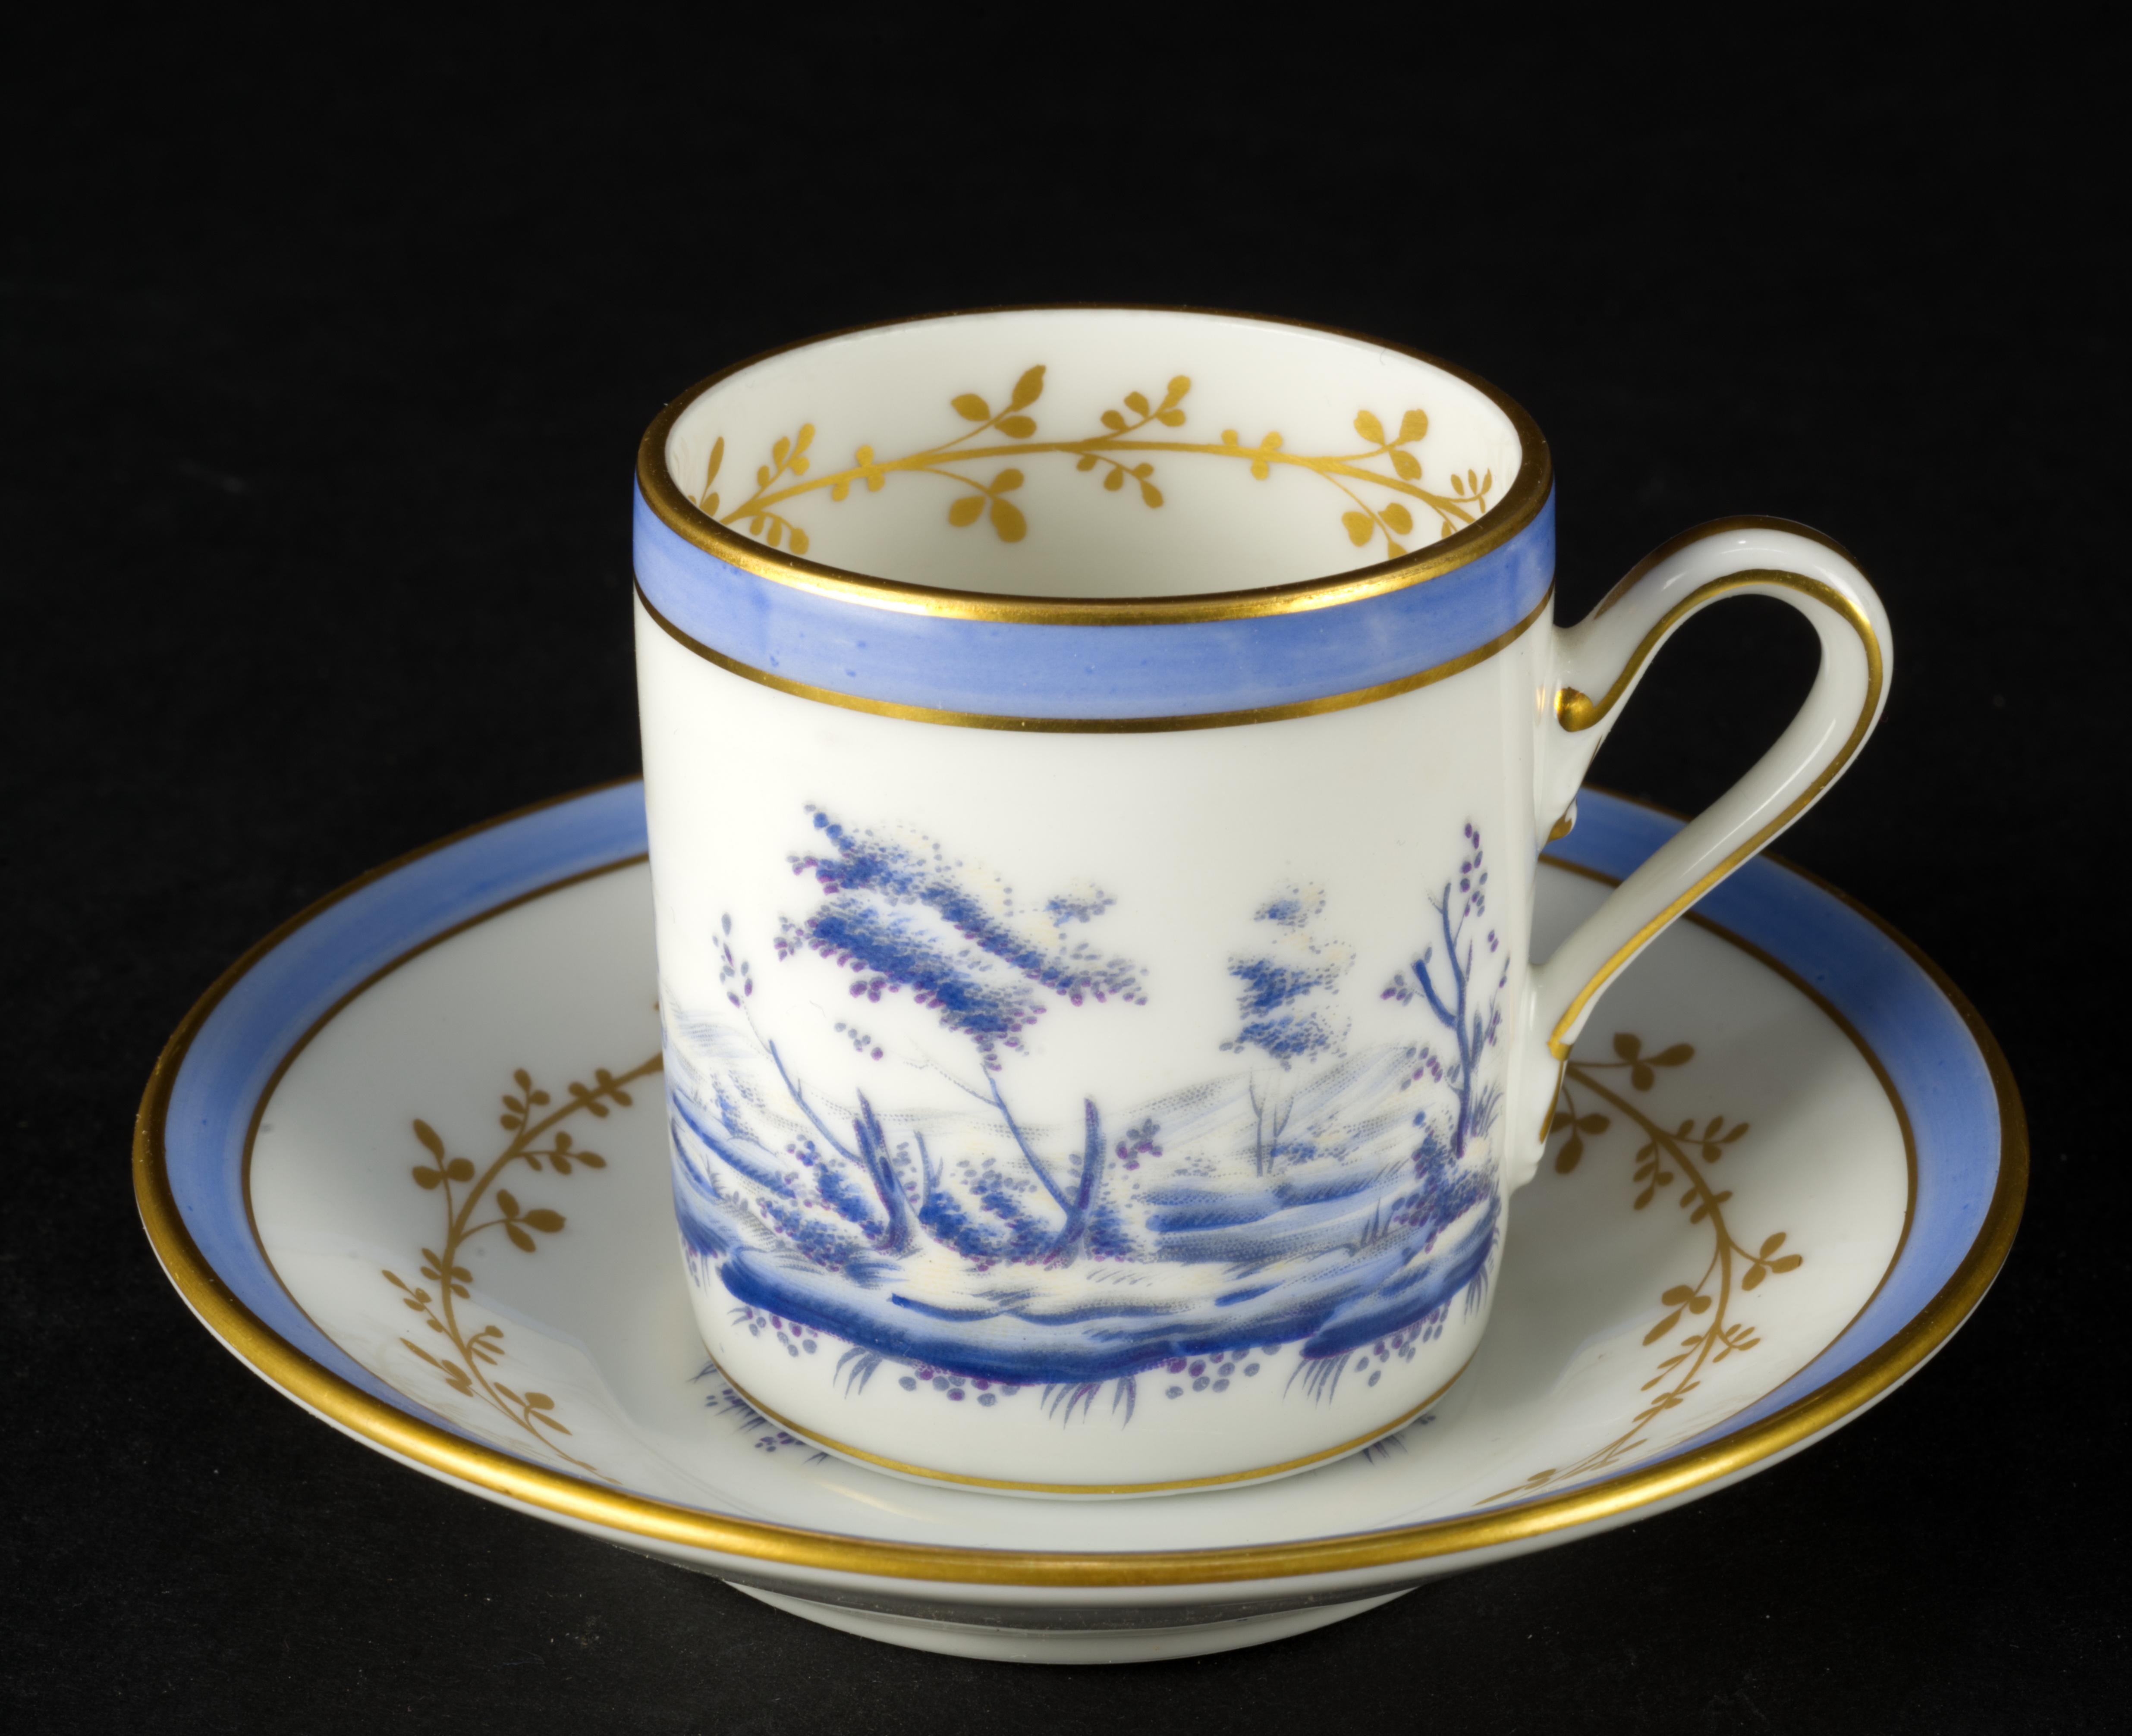  Rare Richard Ginori demitasse or espresso cup and saucer set was made of fine semi-translucent porcelain in Italy. It is decorated with traditional landscape done in different shades of blue on white background with gold and light blue rim. Gold